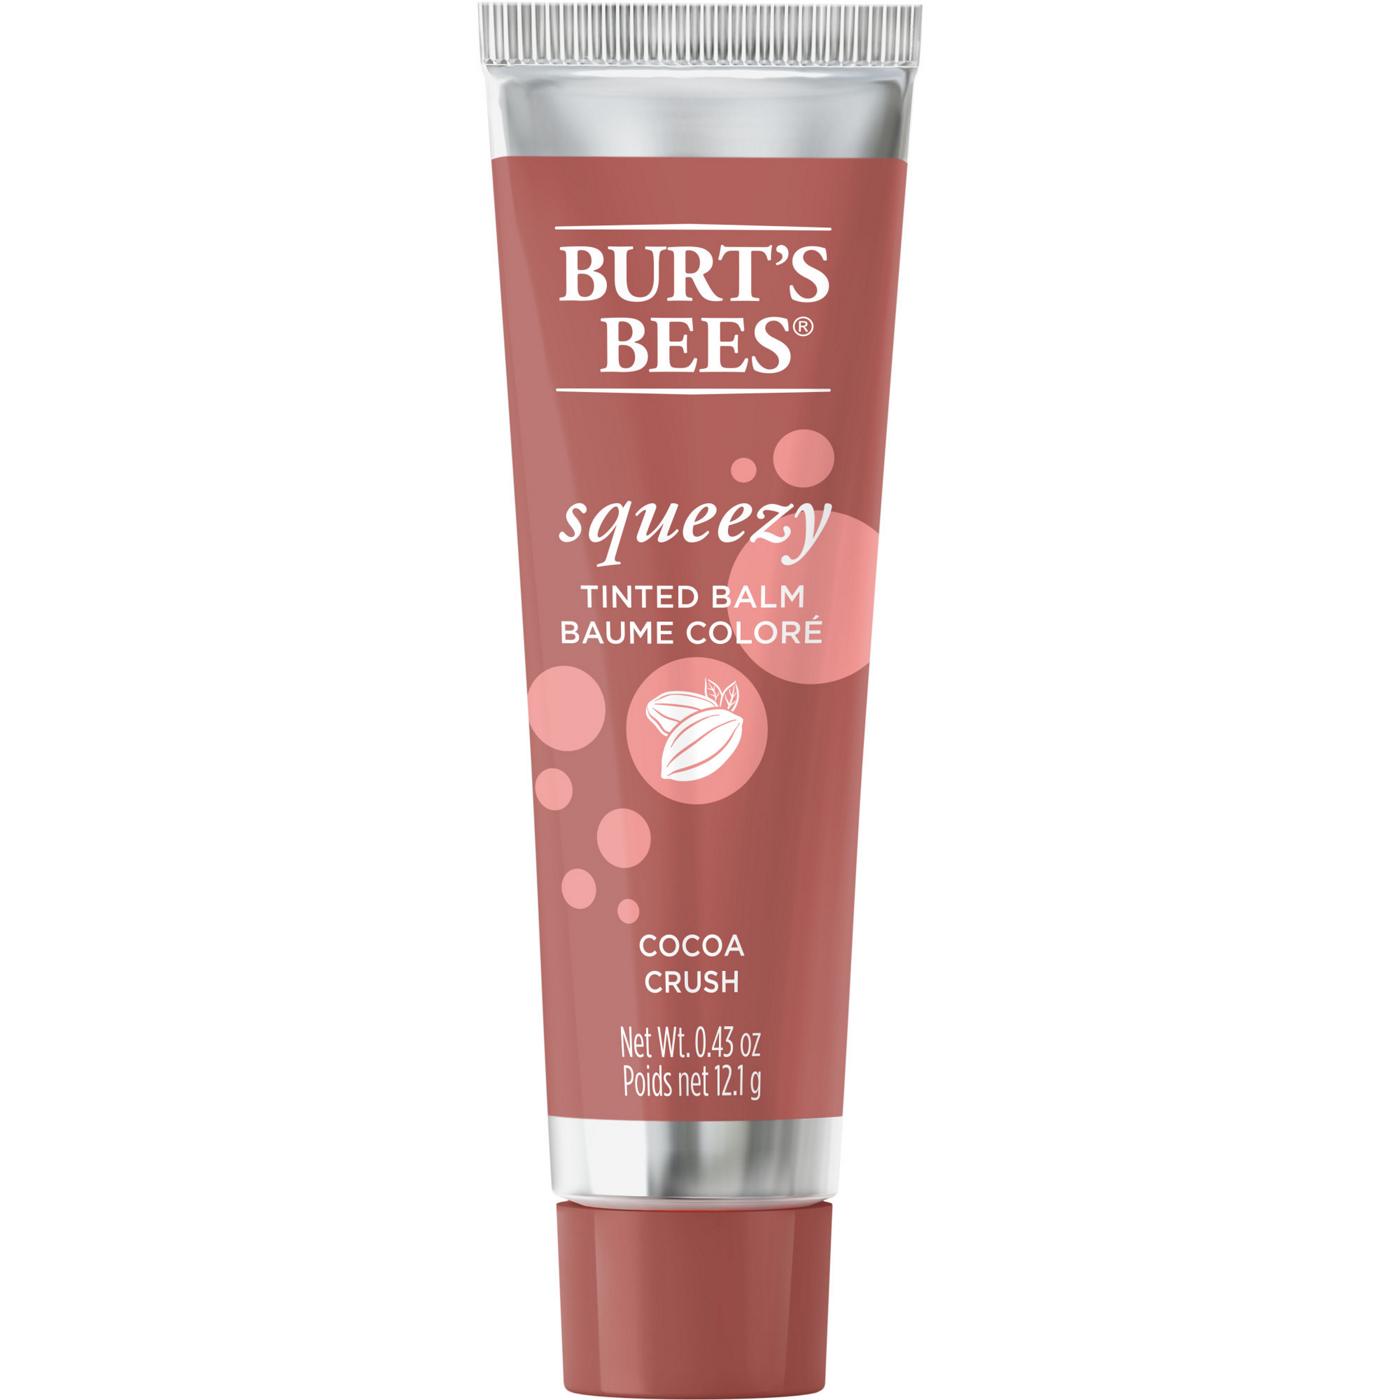 Burt's Bees Squeezy Tinted Balm - Cocoa Crush; image 1 of 7